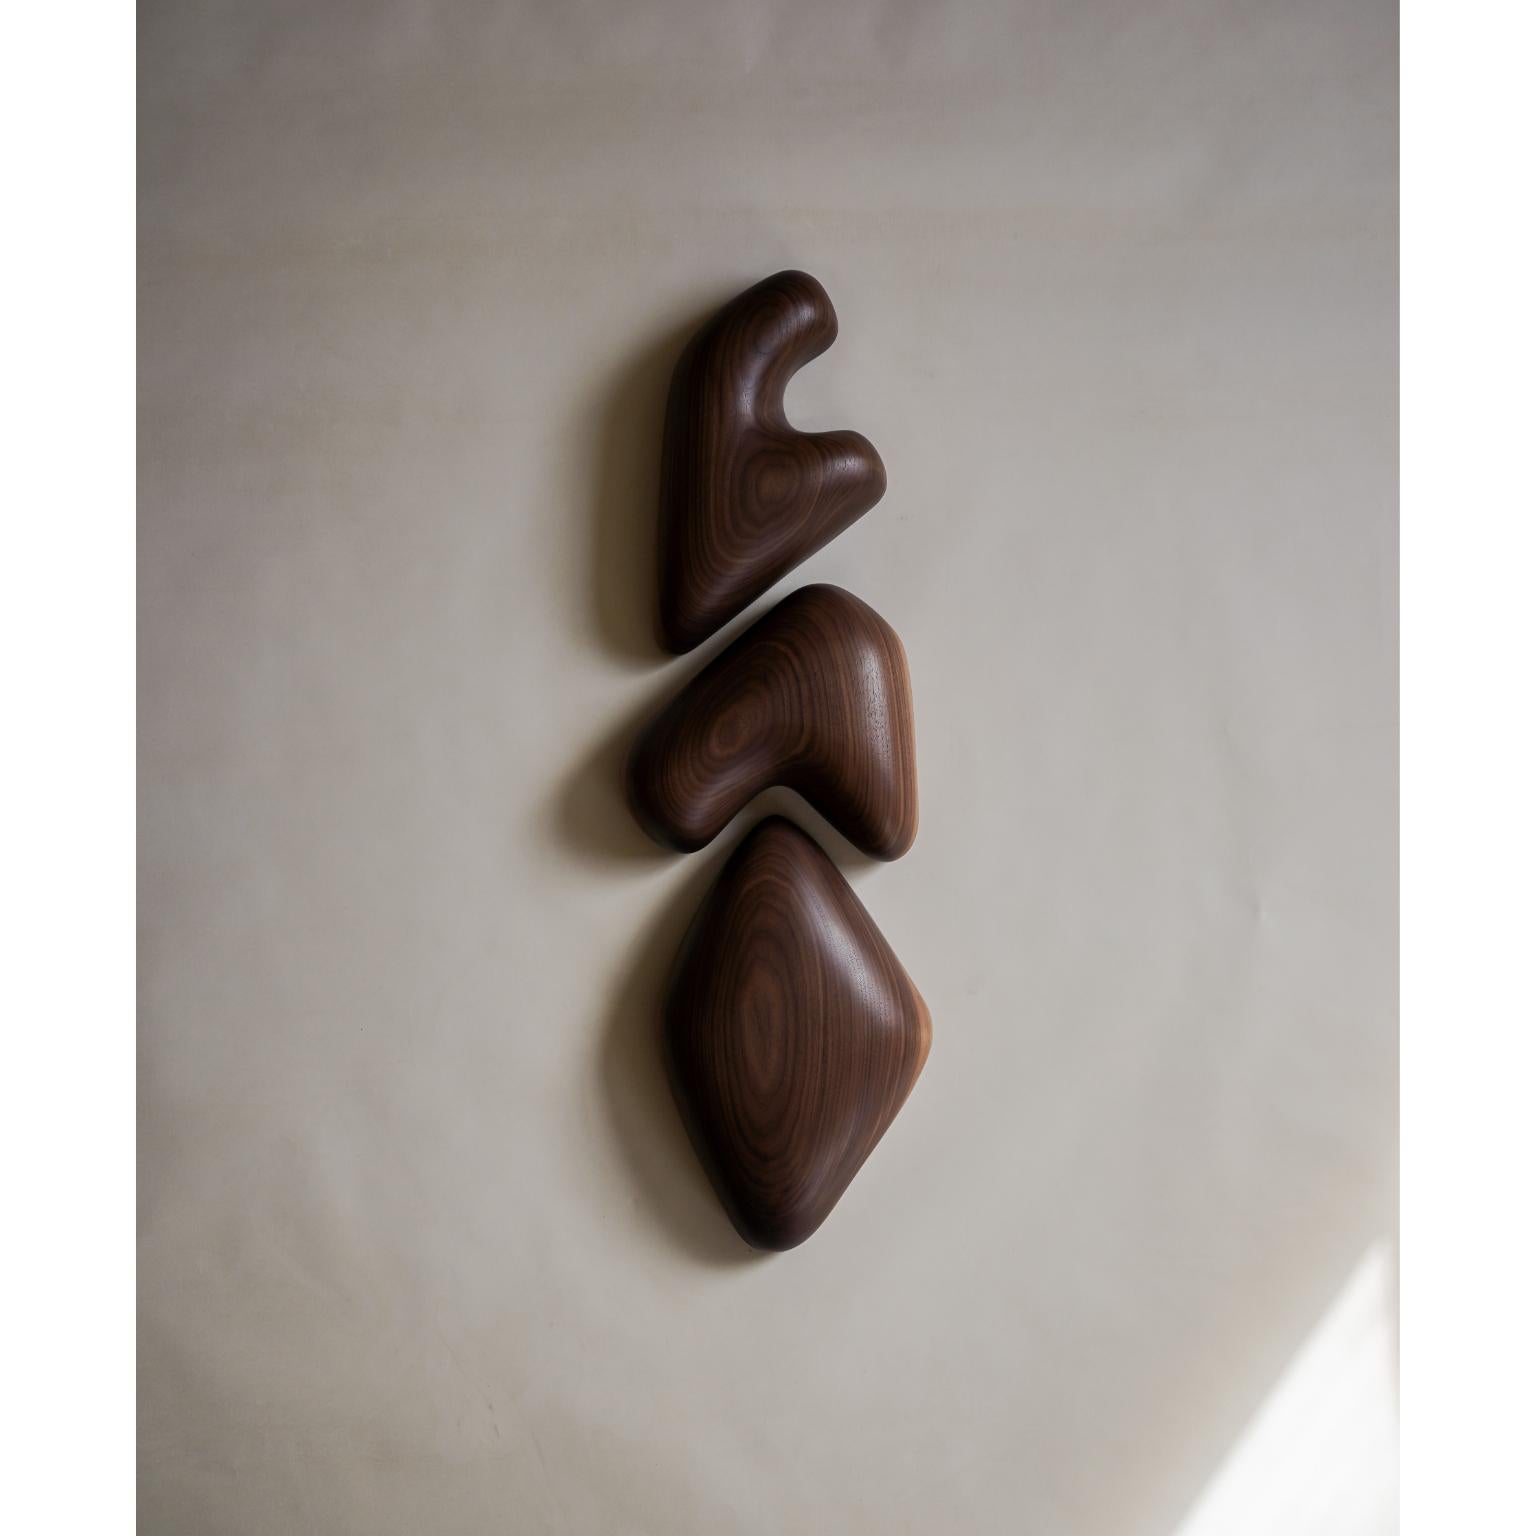 Urbmon 802 Wall Hanging Sculpture by Chandler McLellan In New Condition For Sale In Geneve, CH